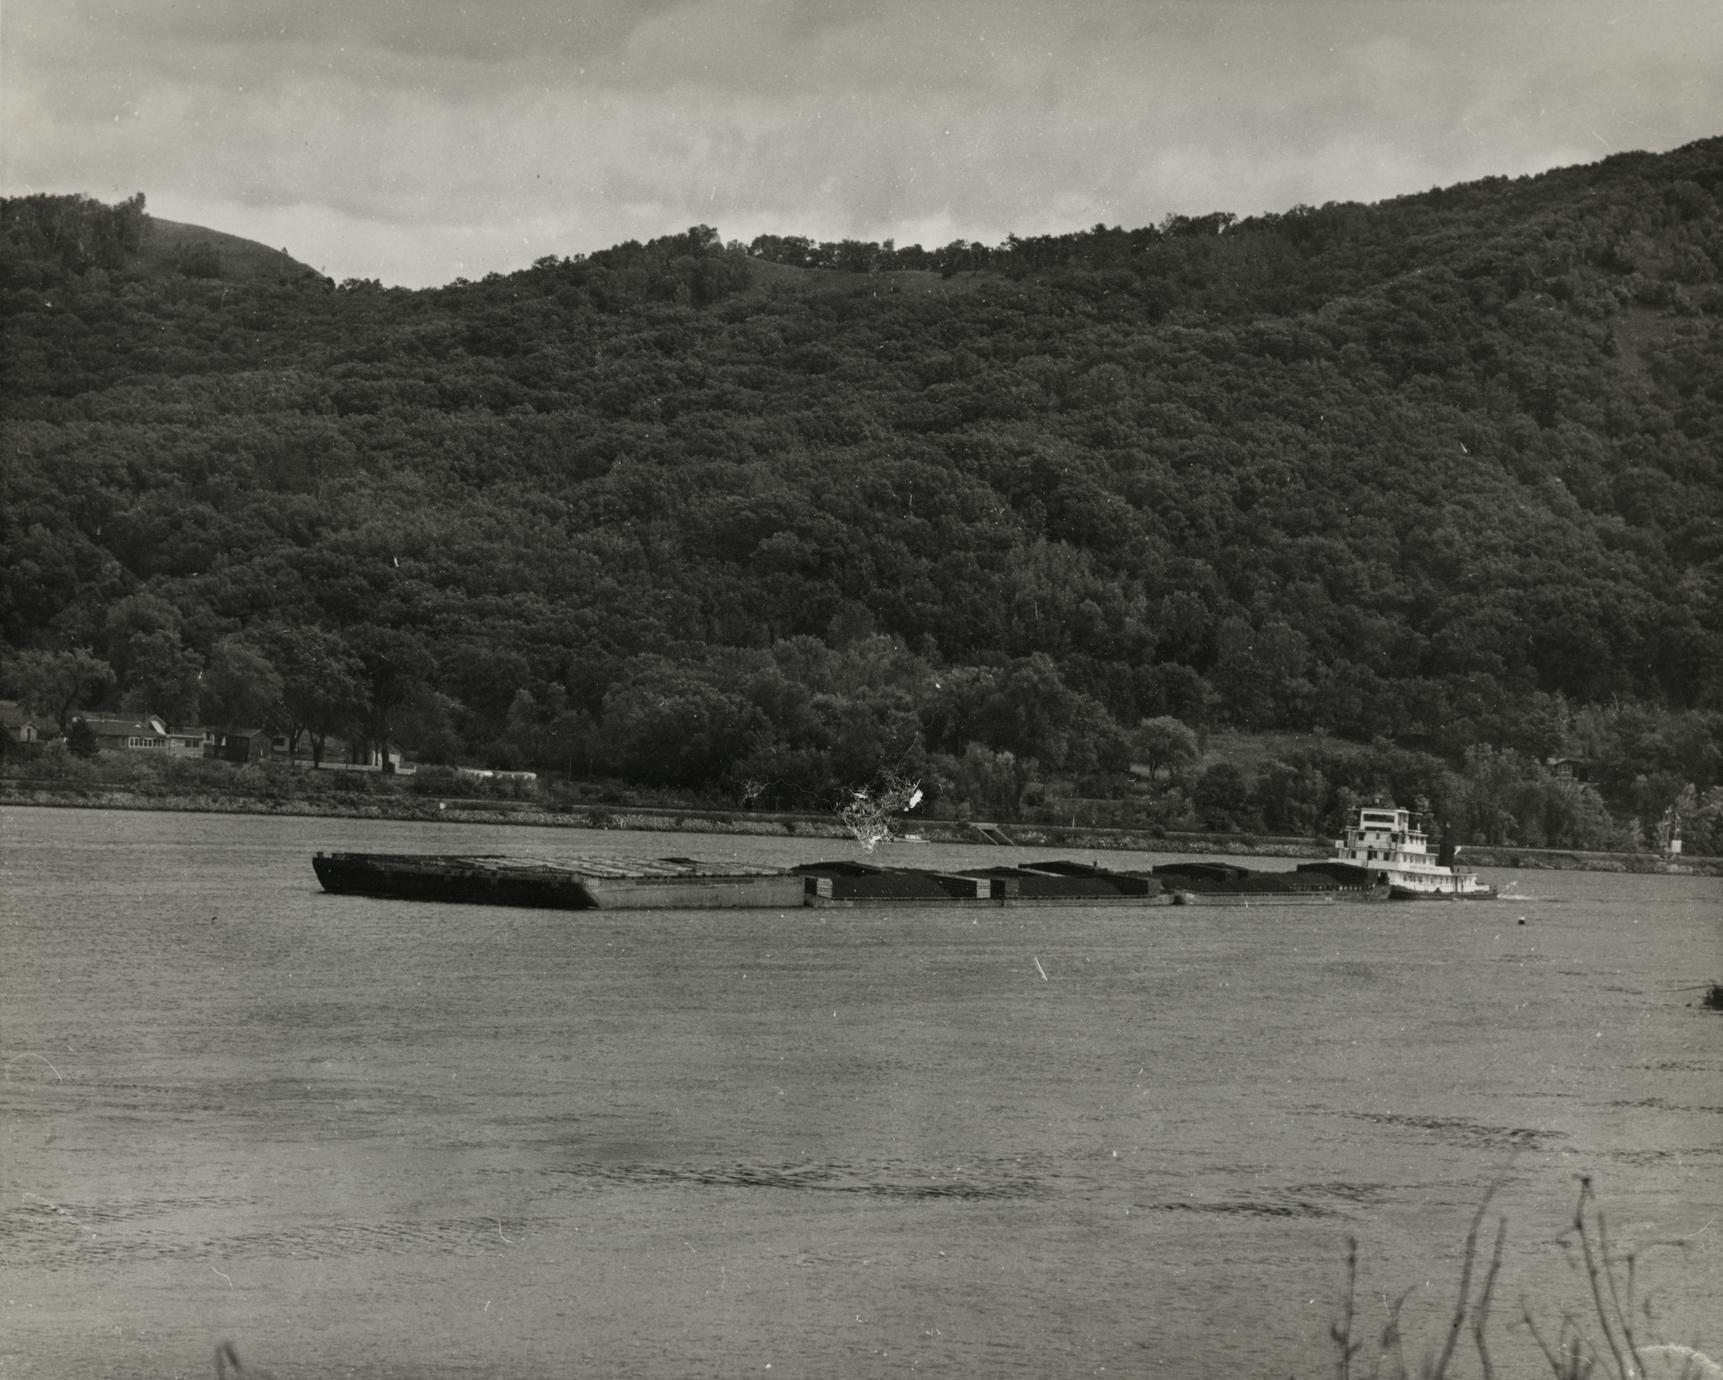 Unidentified Towboat